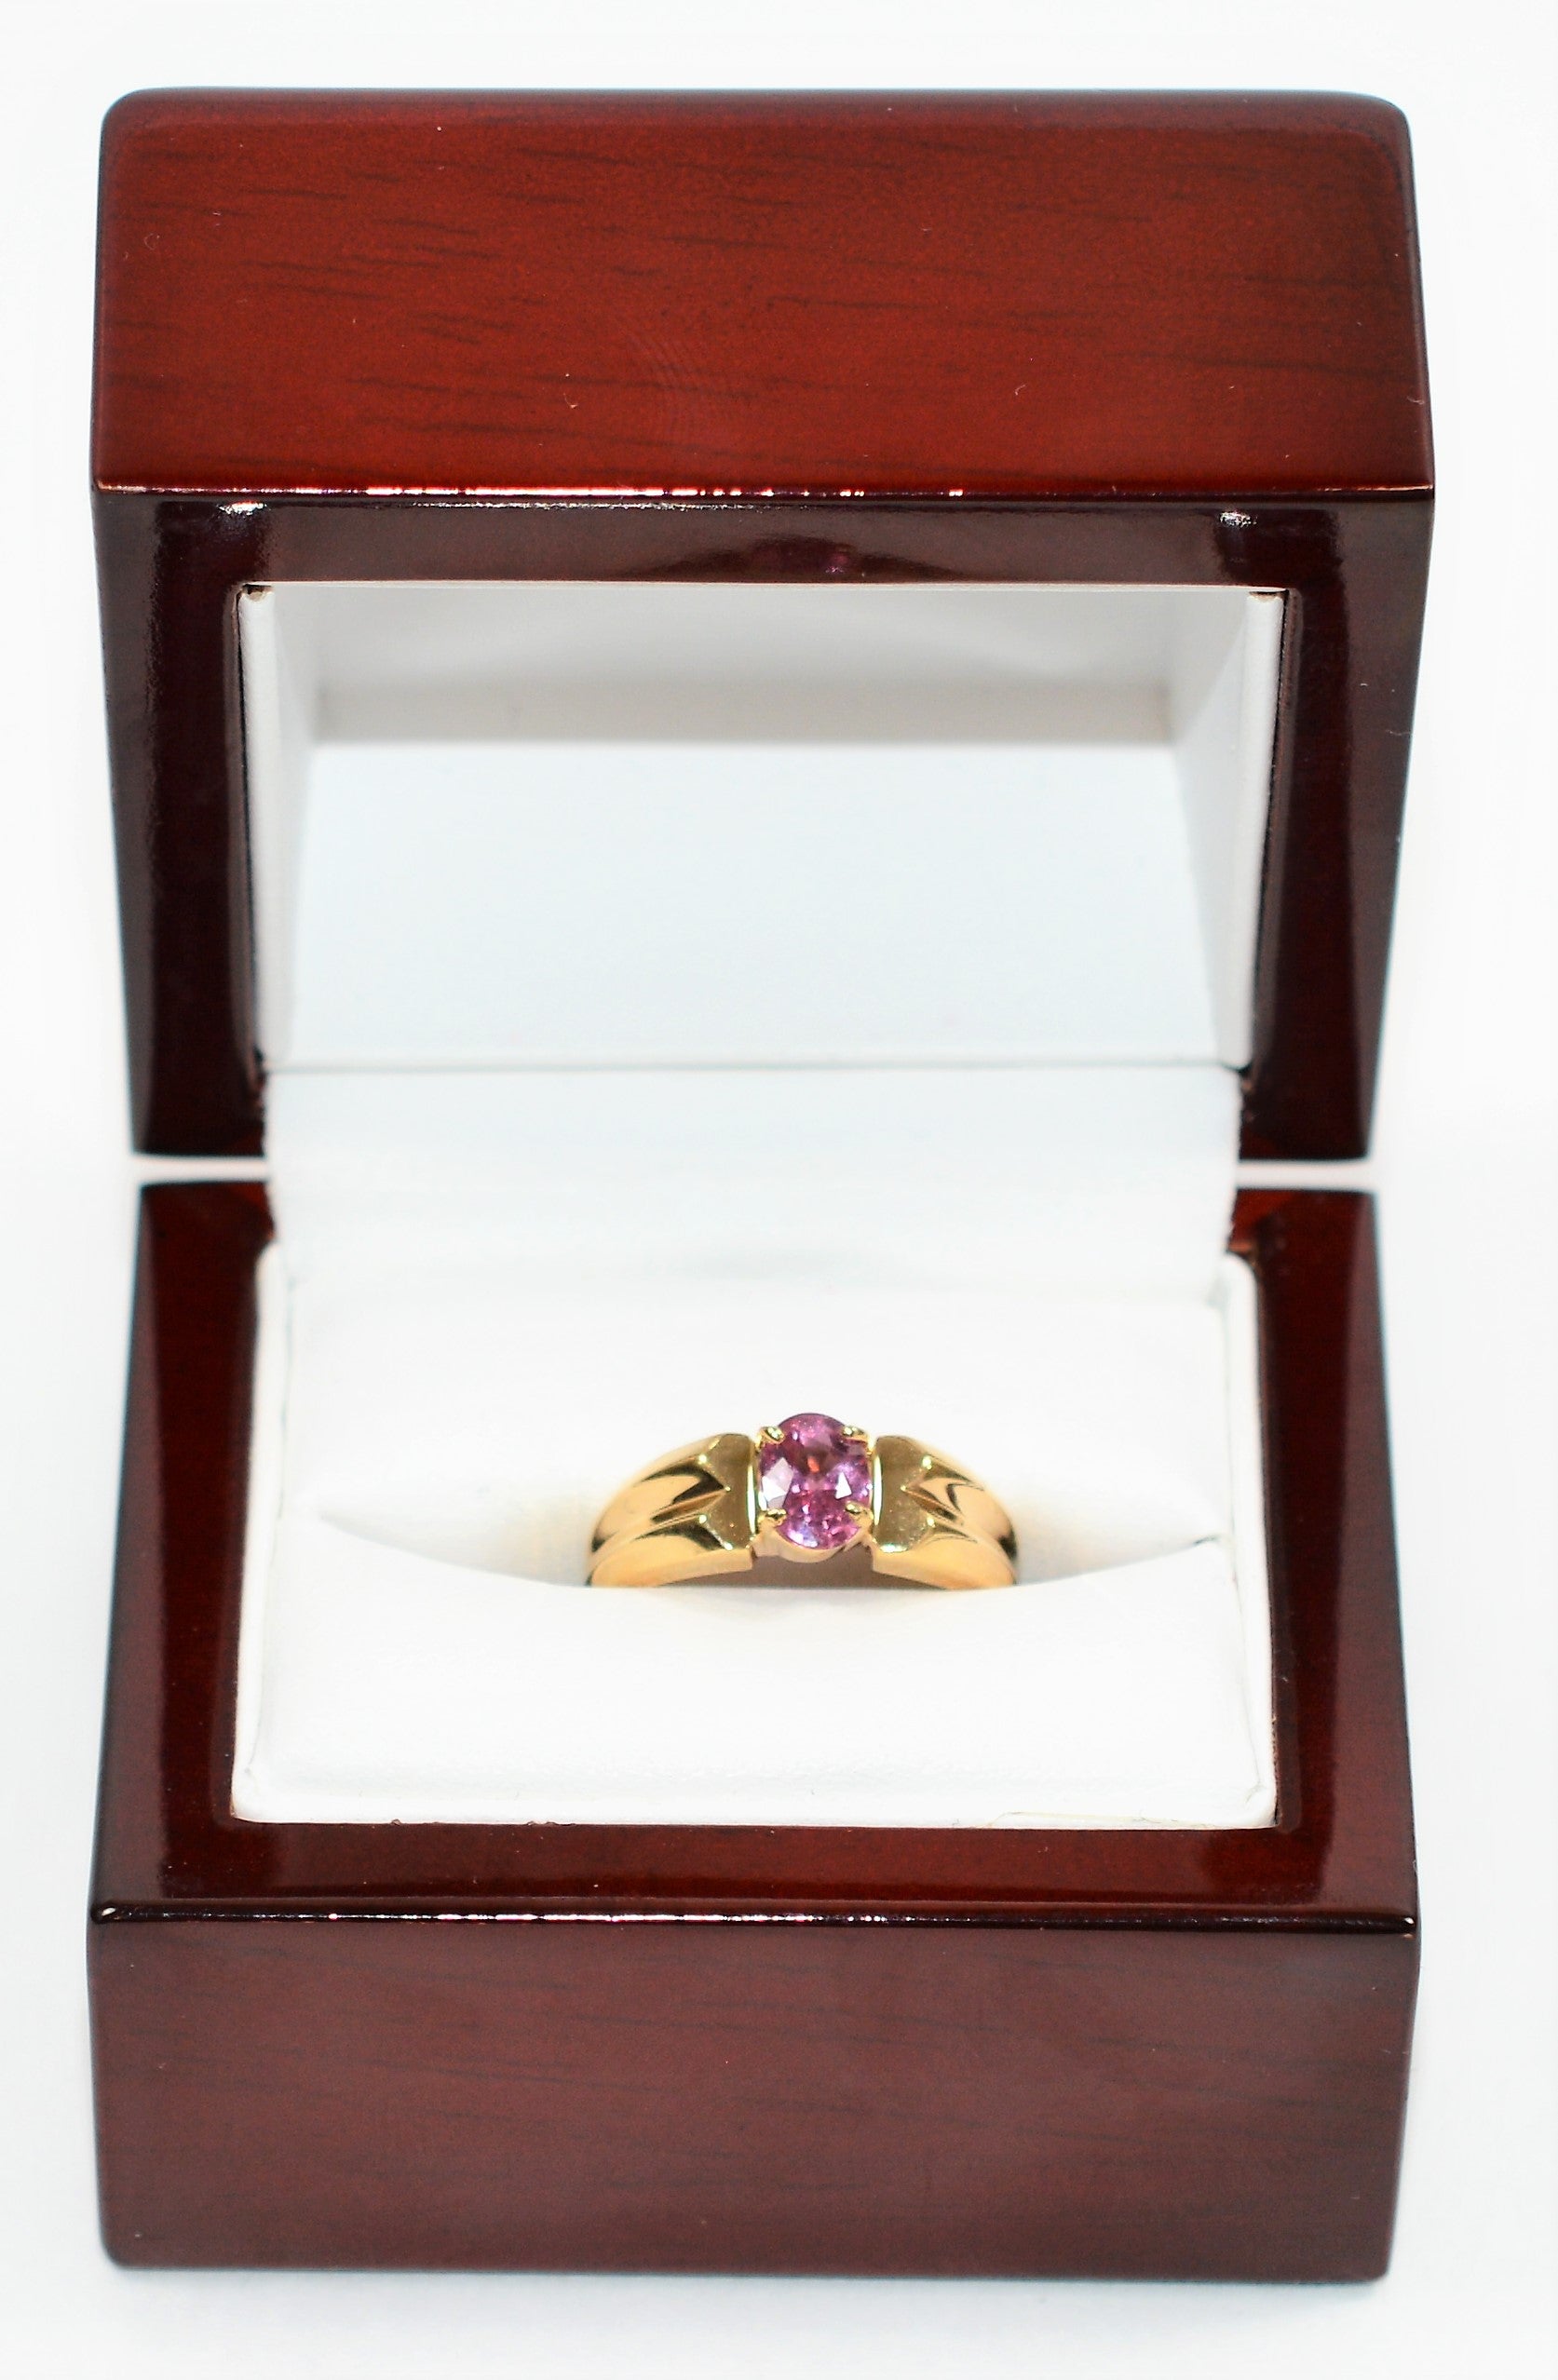 Natural Padparadscha Sapphire Ring 14K Solid Gold .98ct Solitaire Ring Gemstone Ring Pink Ring Engagement Ring Vintage Ring Estate Jewellery